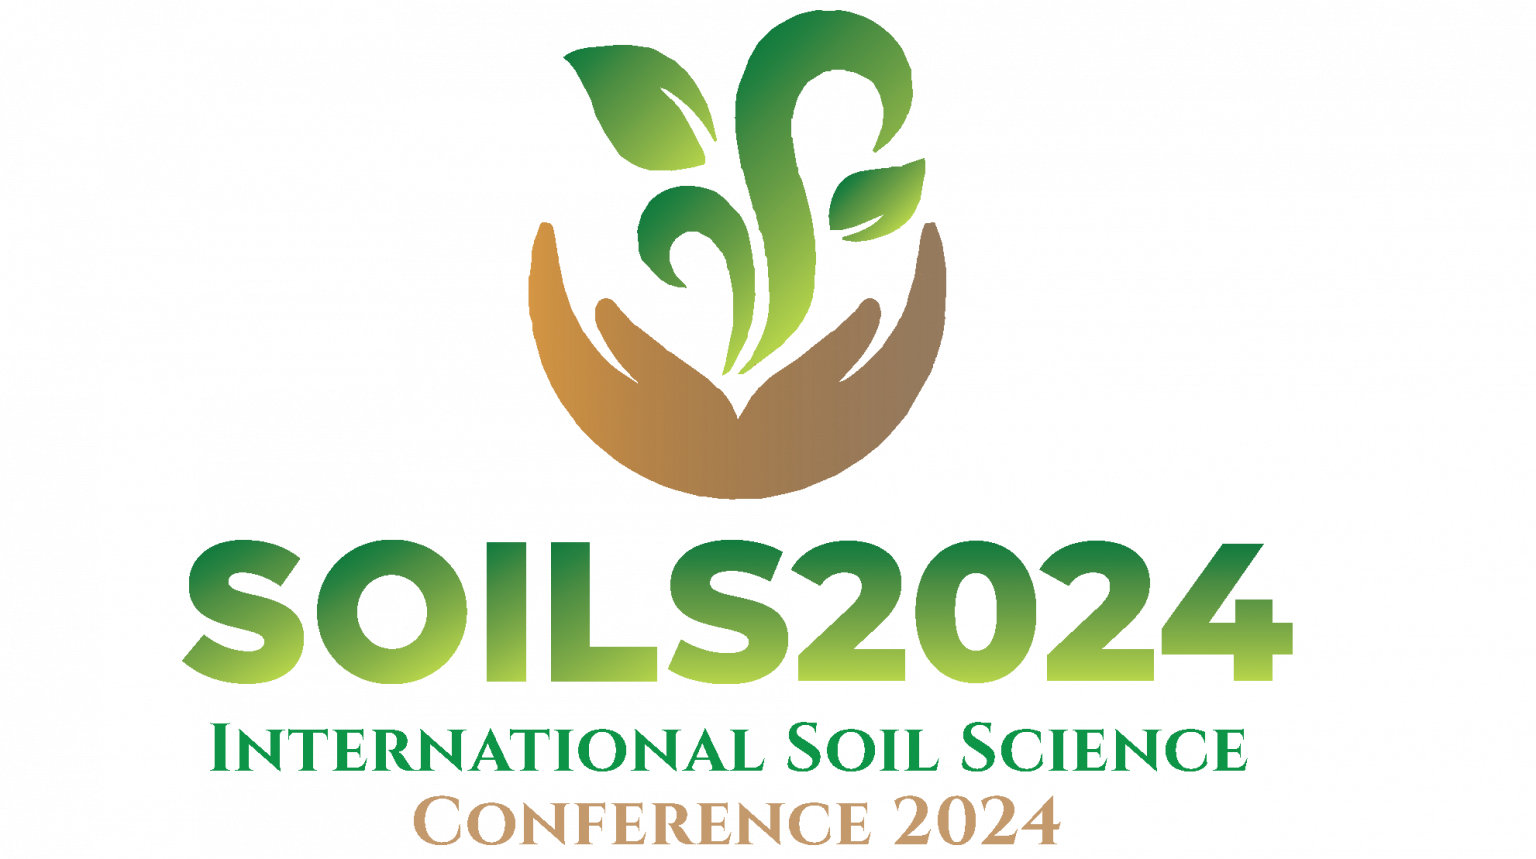 CALL FOR PAPER THE INTERNATIONAL SOIL SCIENCE CONFERENCE 2024